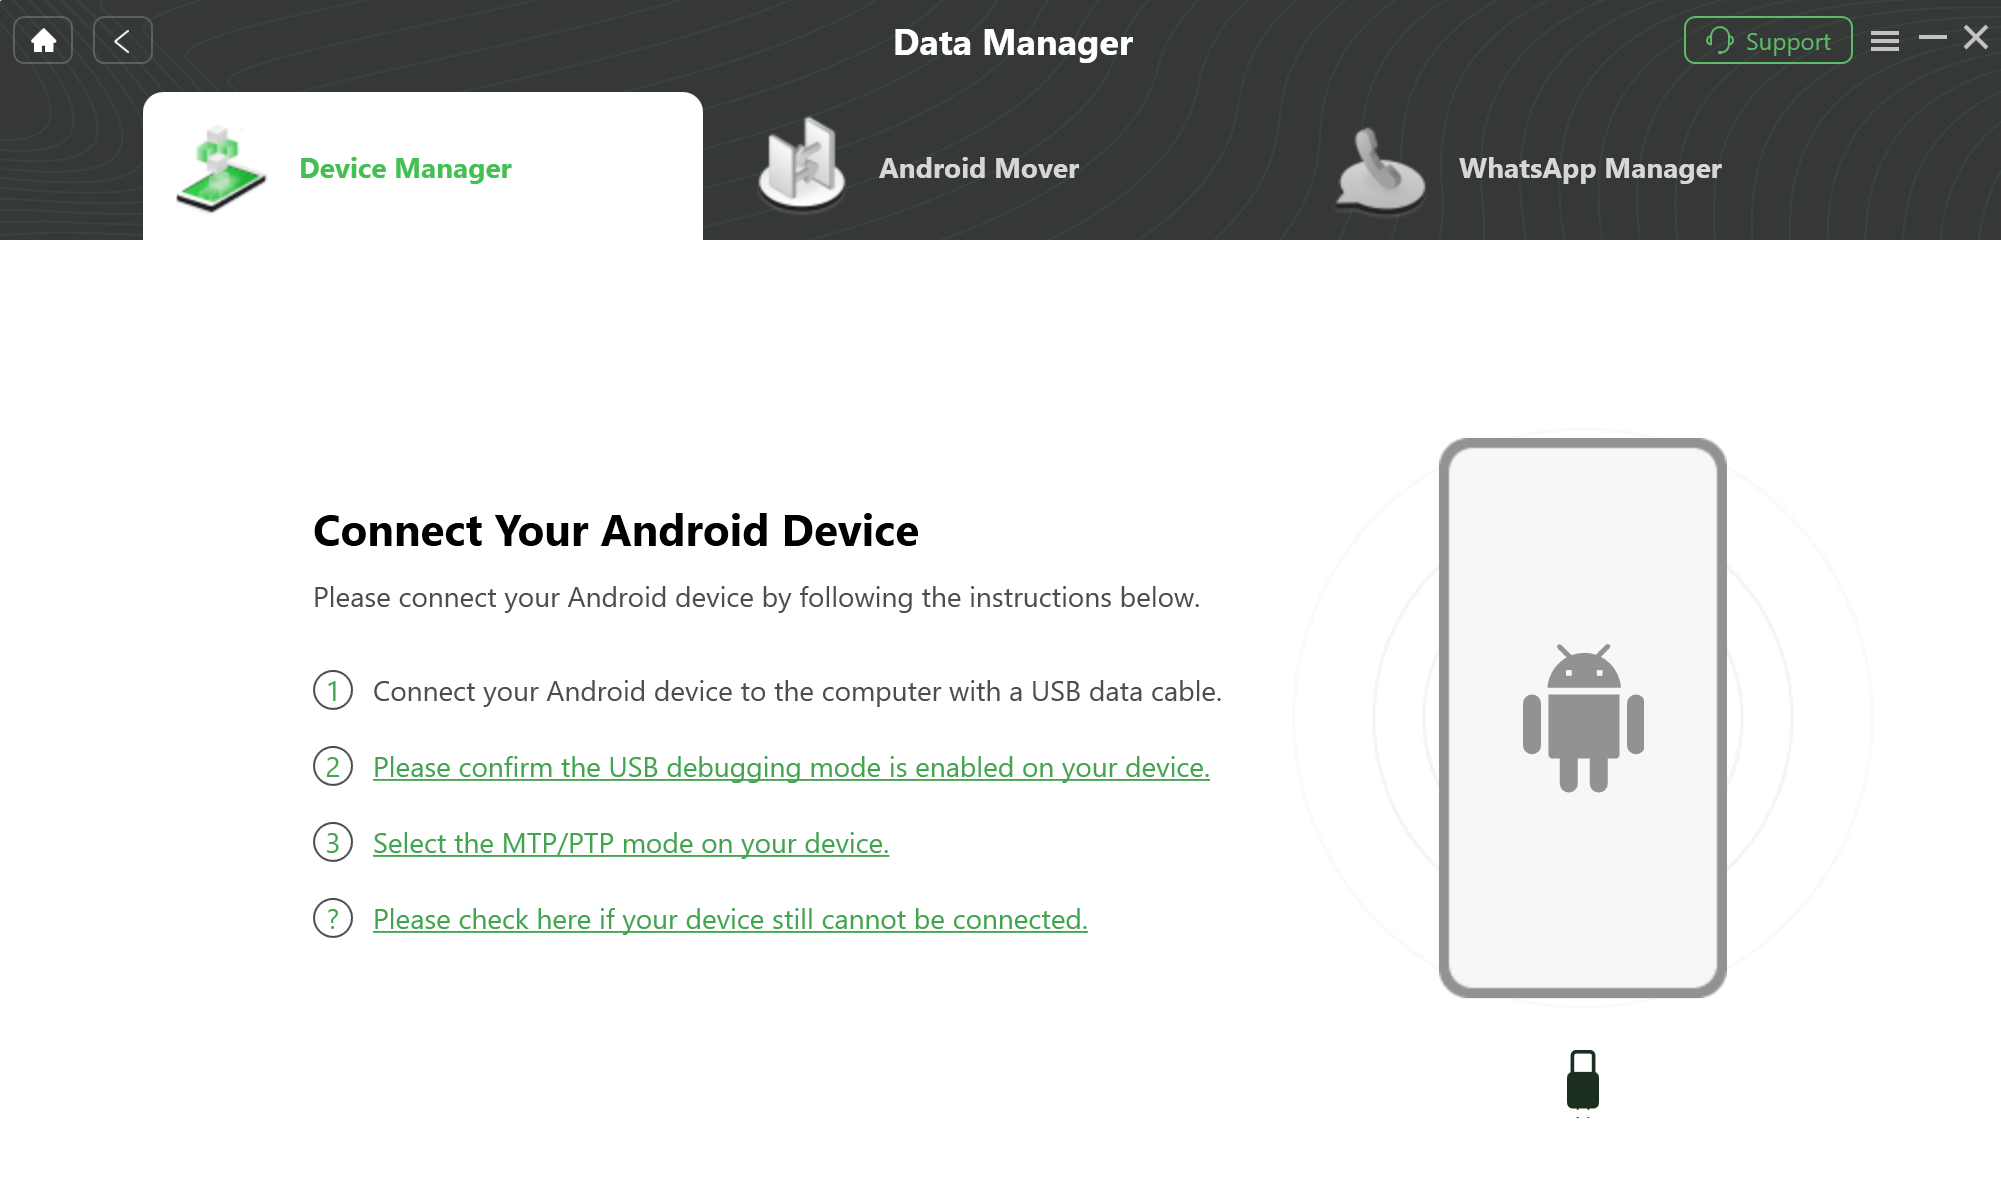 Connect Your Android Device